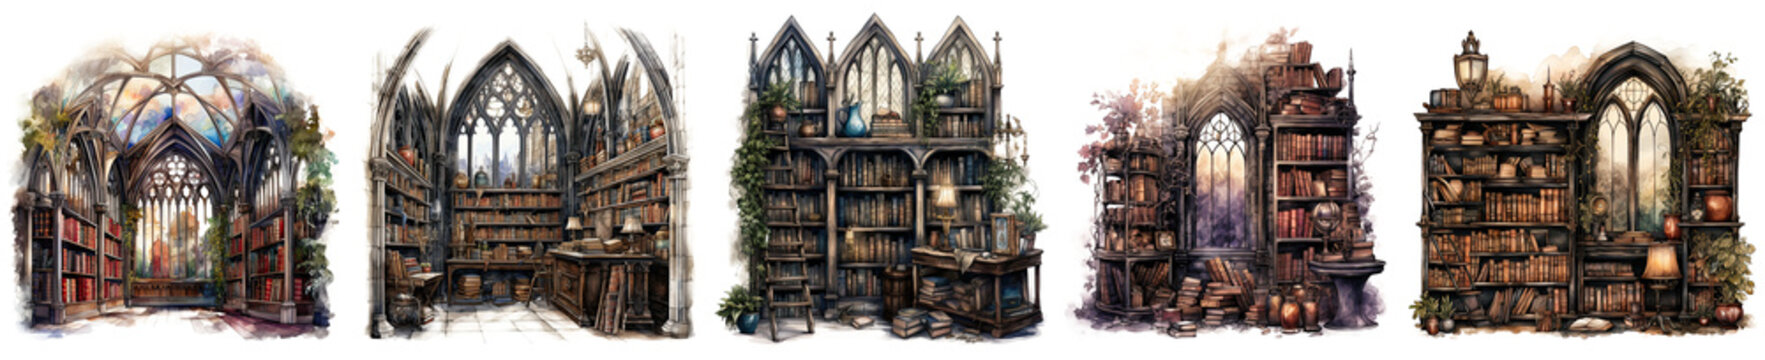 fairytale gothic library clipart watercolor collection isolated on transparent background